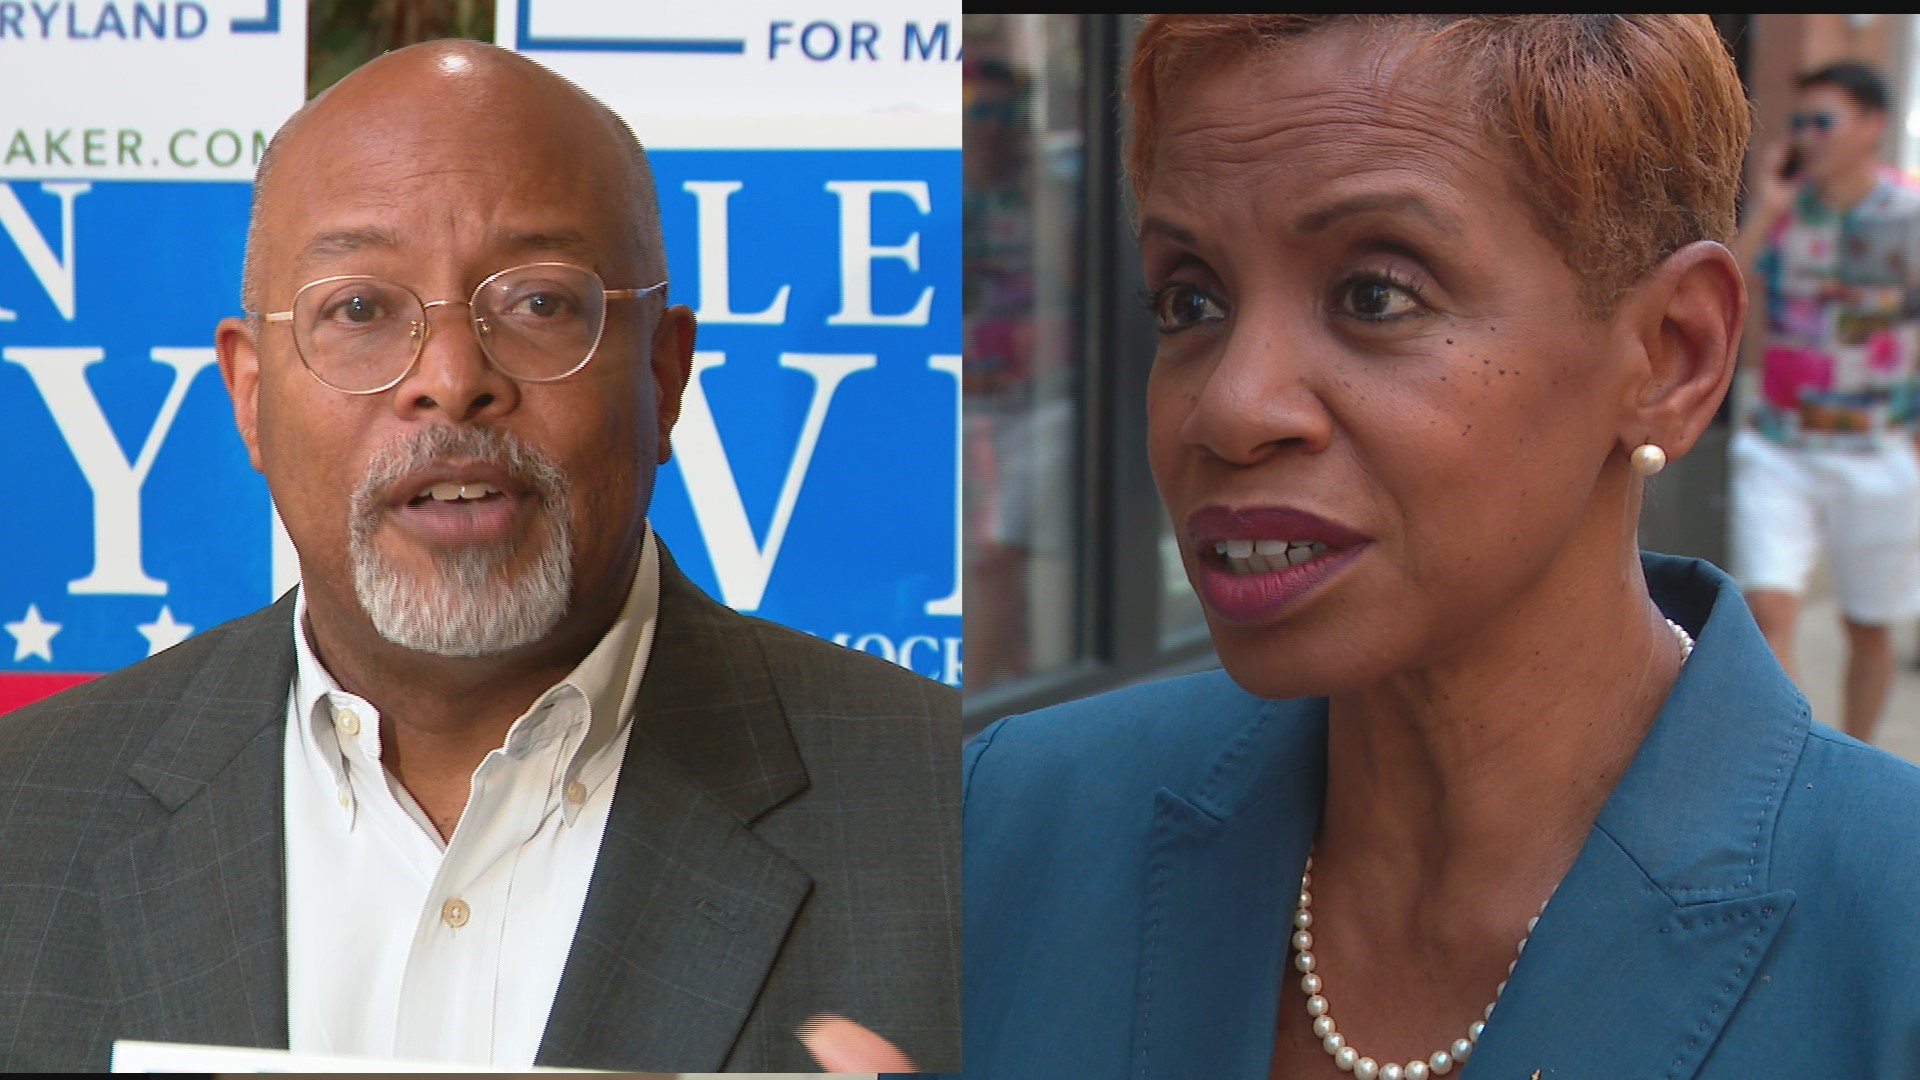 Former County Executive Rushern Baker endorses Glenn Ivey while Hilary Clinton boosts Donna Edwards.